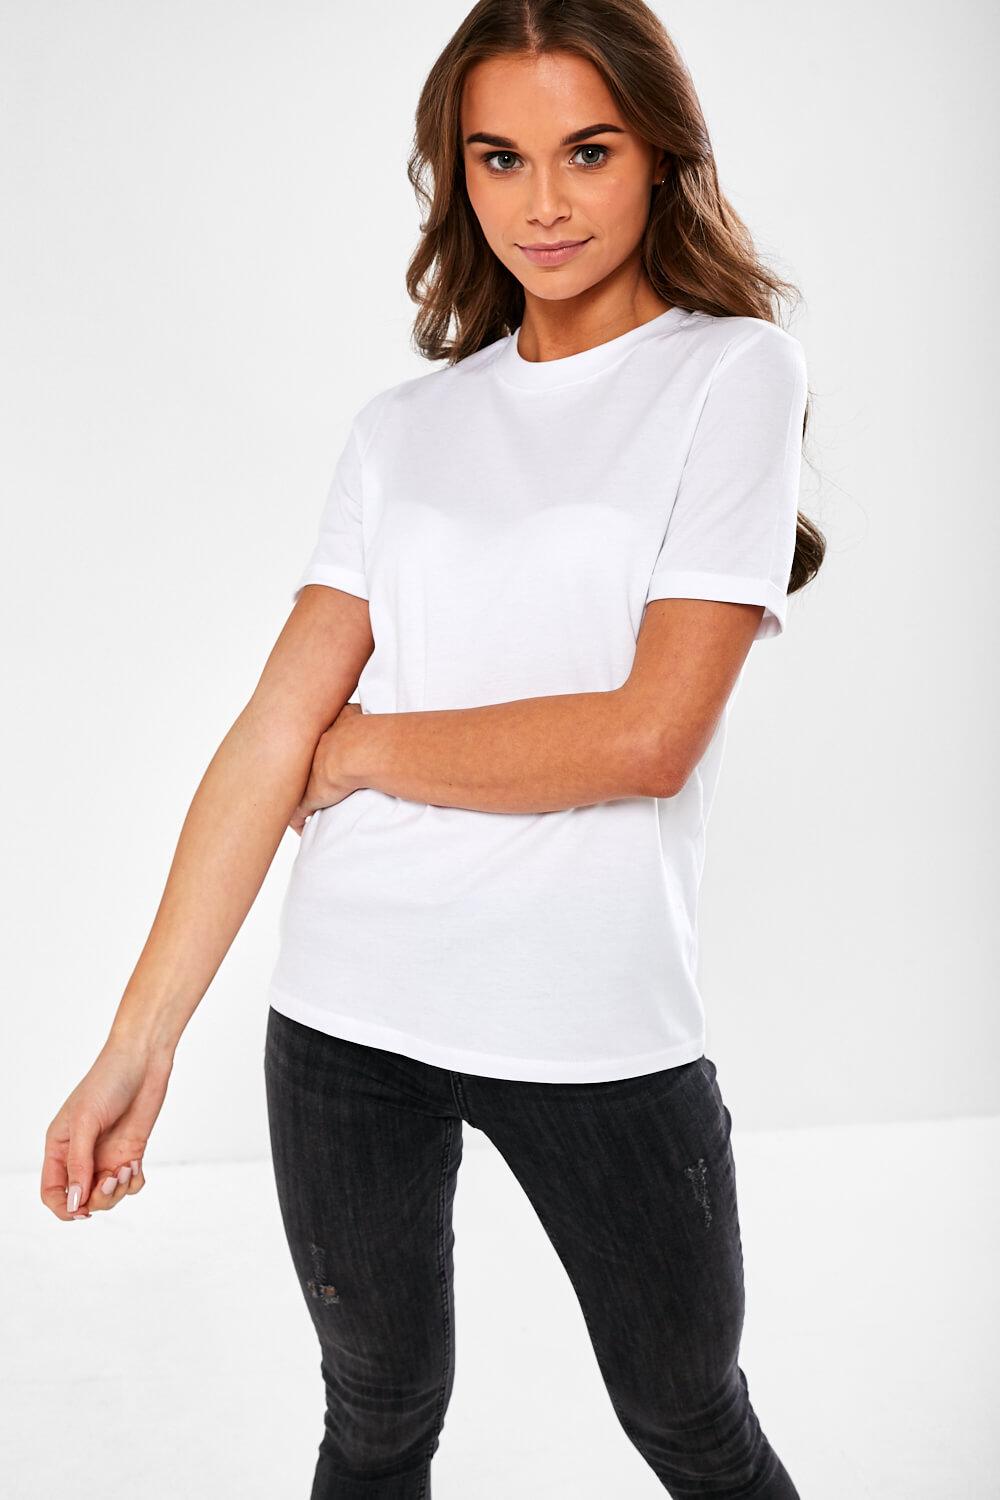 Pieces Ria T-Shirt in White | iCLOTHING - iCLOTHING